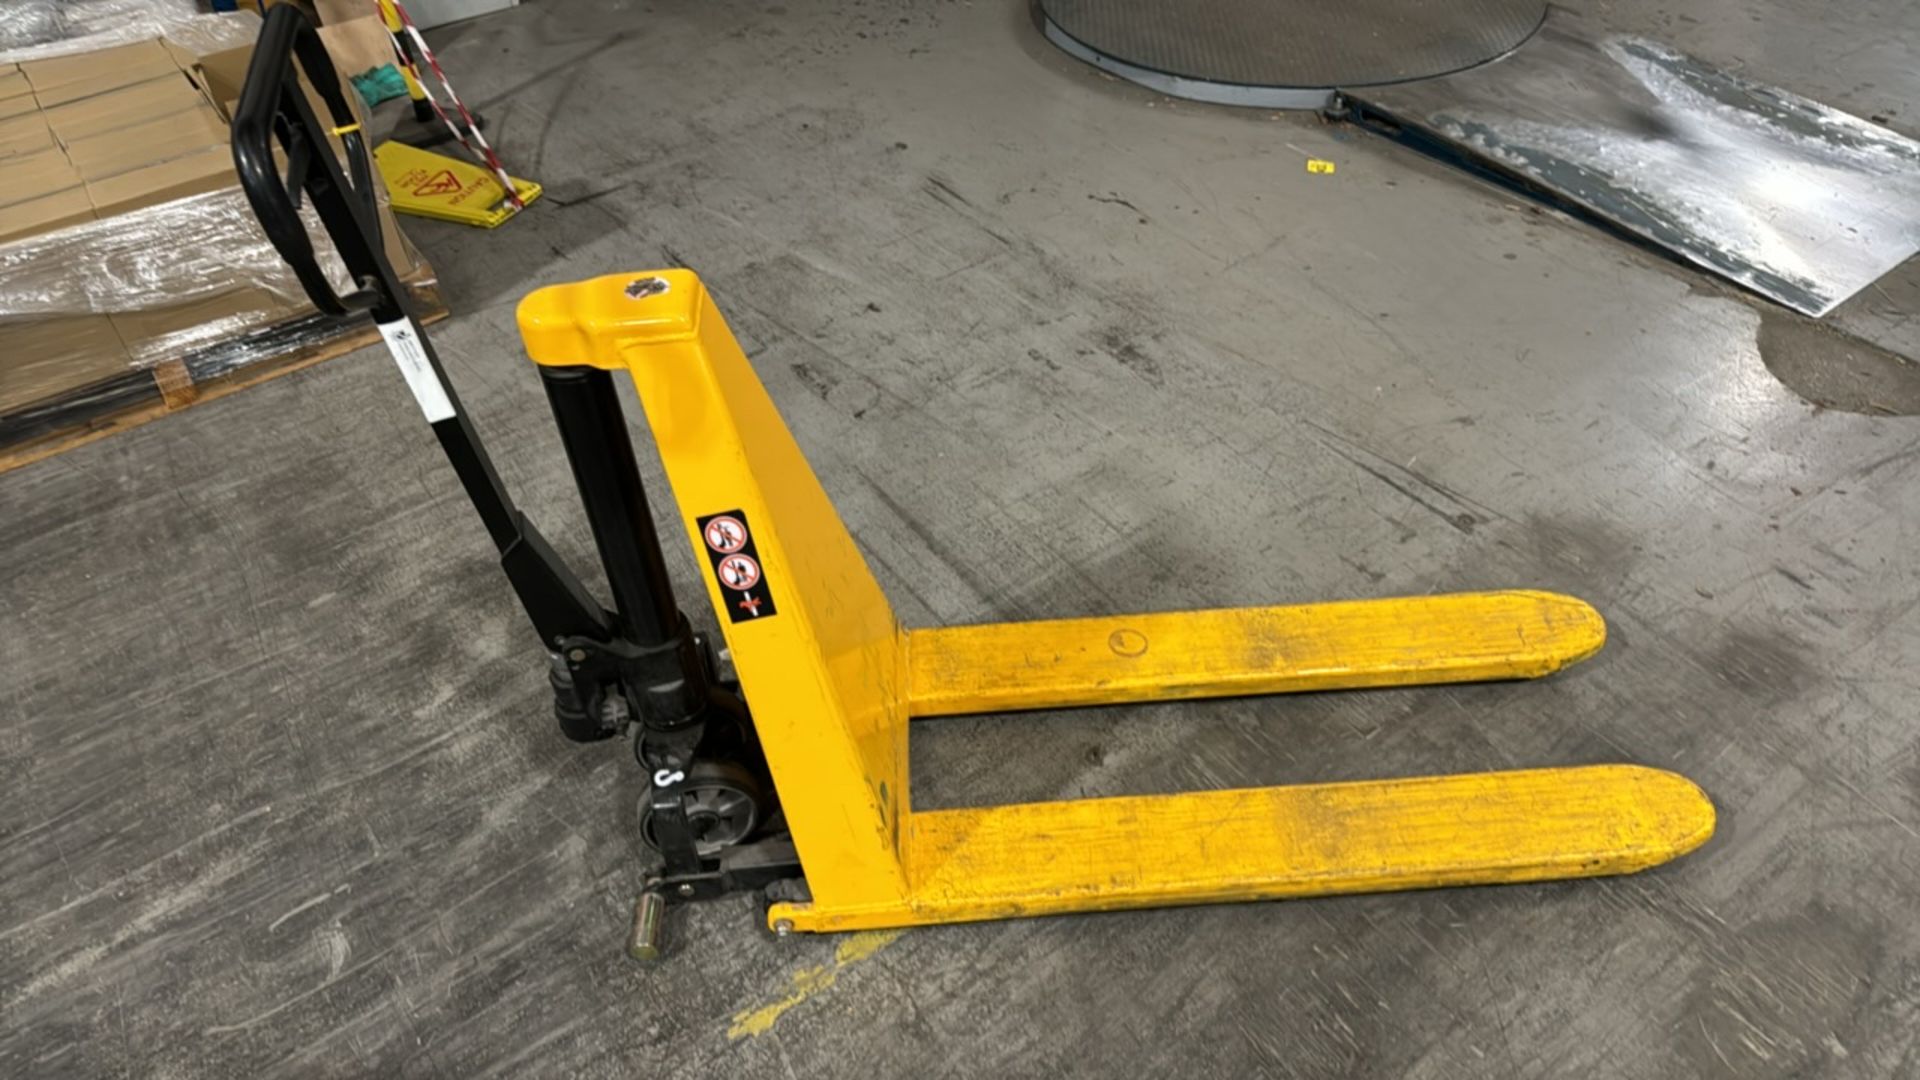 Total Lifter High Lift Pallet Truck - Image 3 of 5